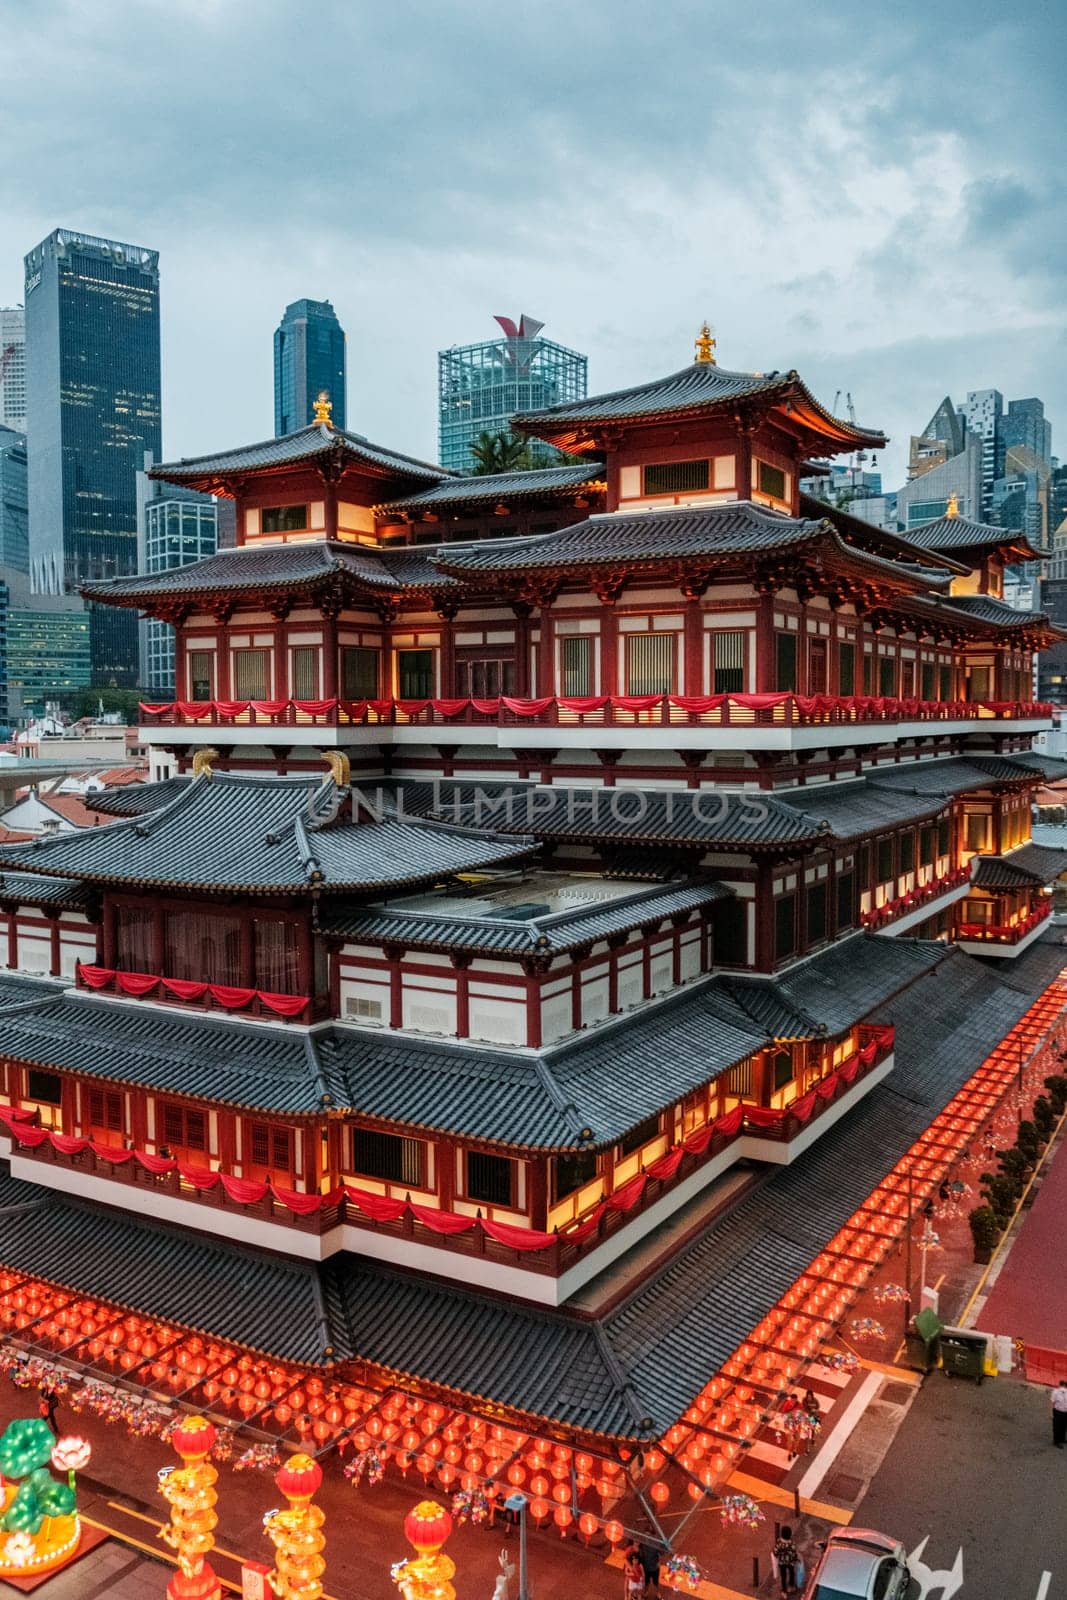 Buddha Tooth Relic Temple and Museum in the Chinatown district of Singapore Portrait by jinhongljh